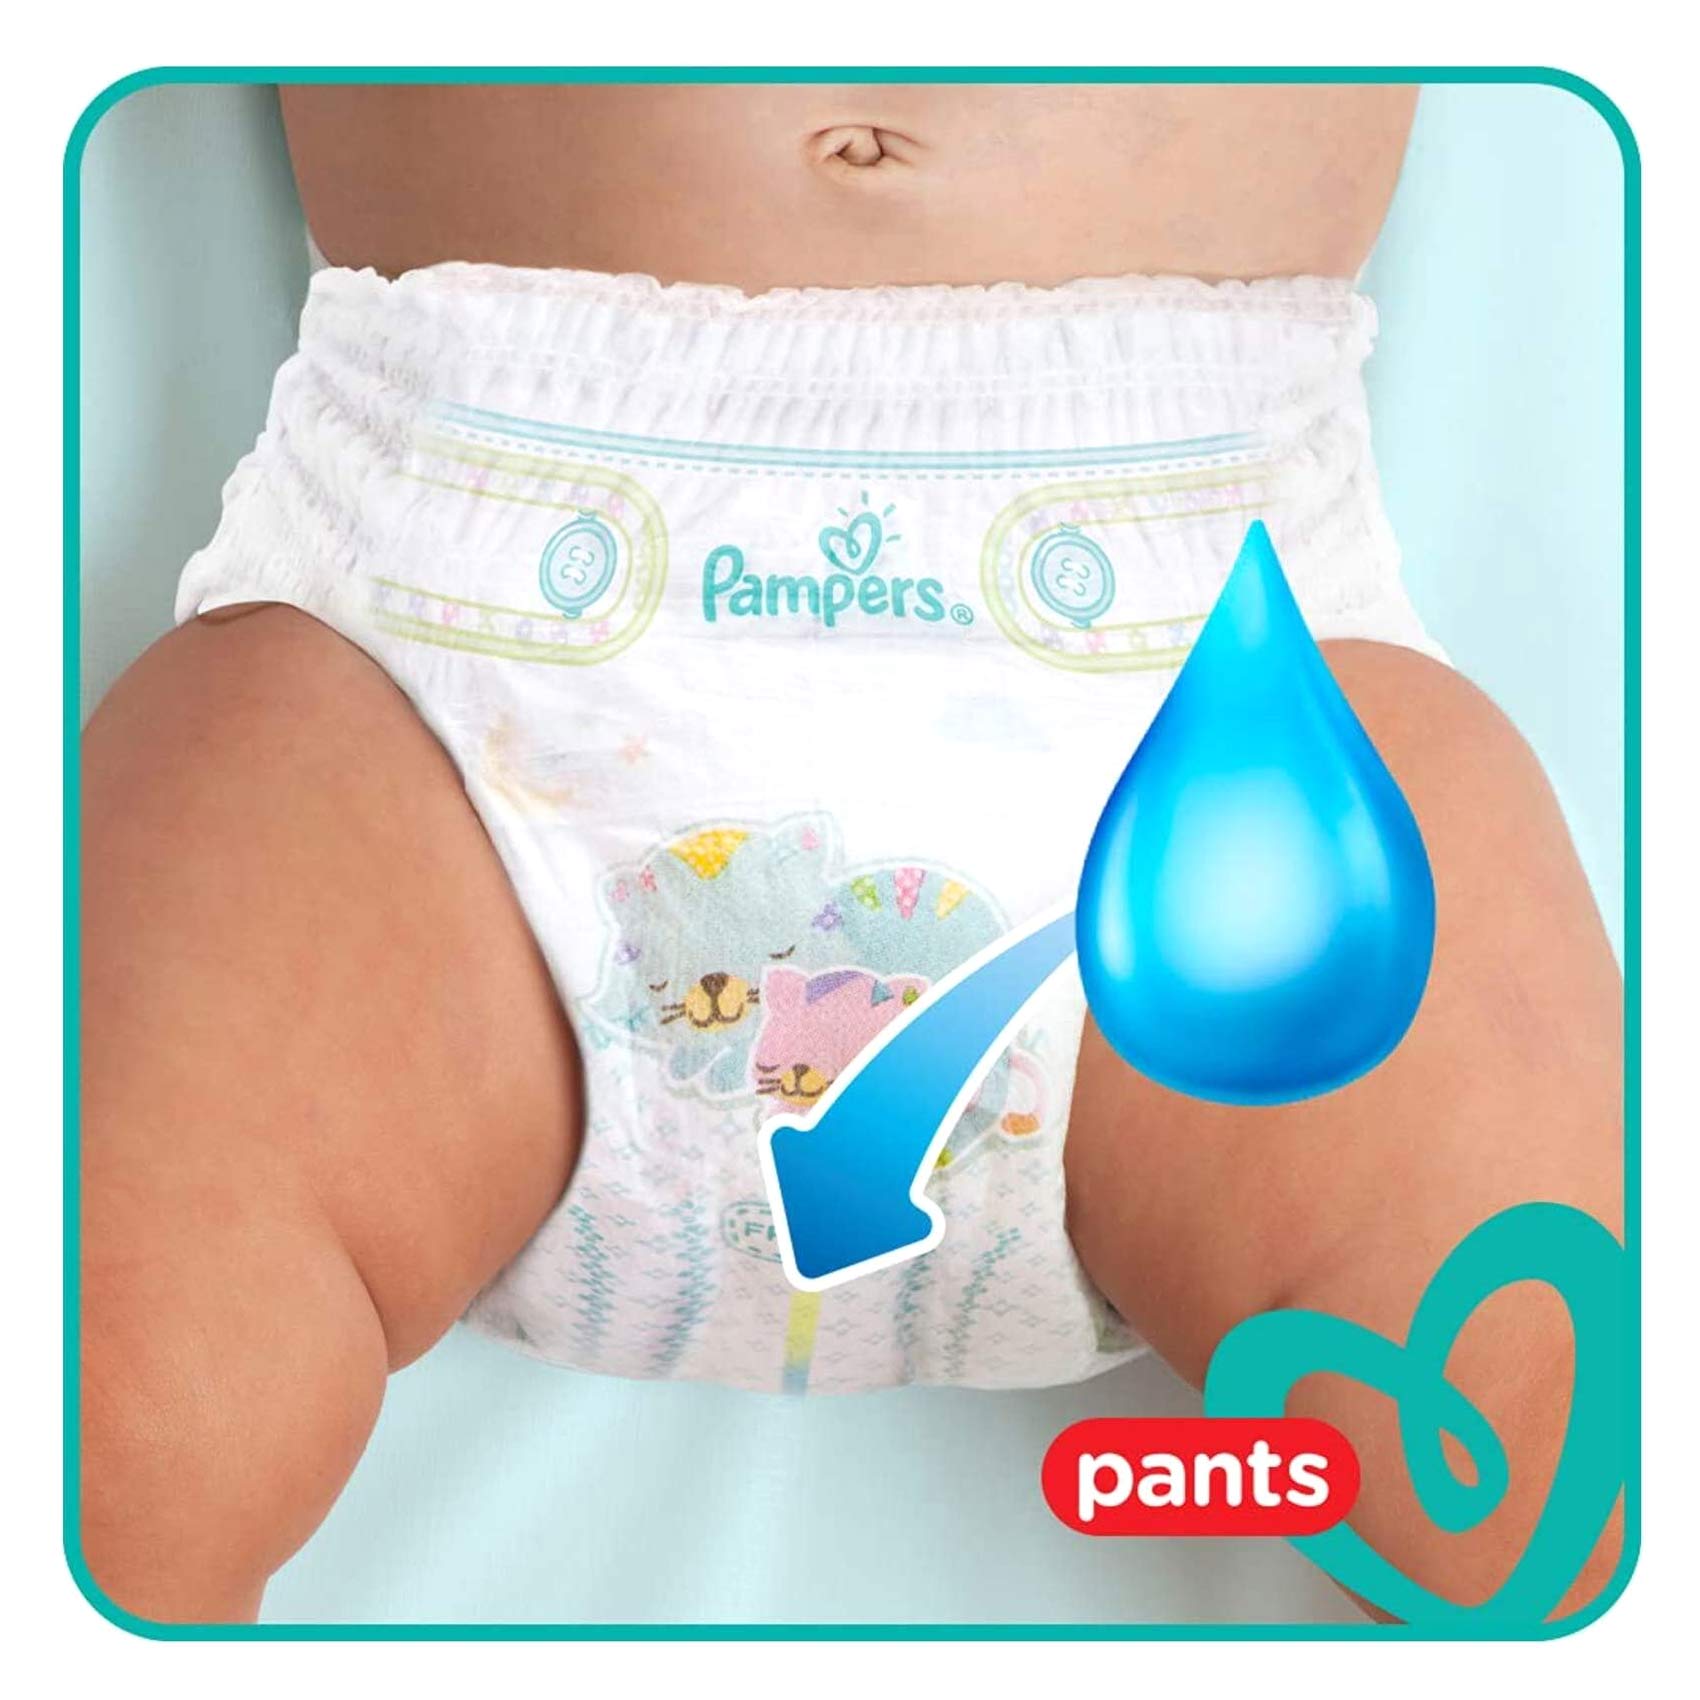 Pampers Baby Pants Diaper Maxi Size 4 50 Count 9-14 kg